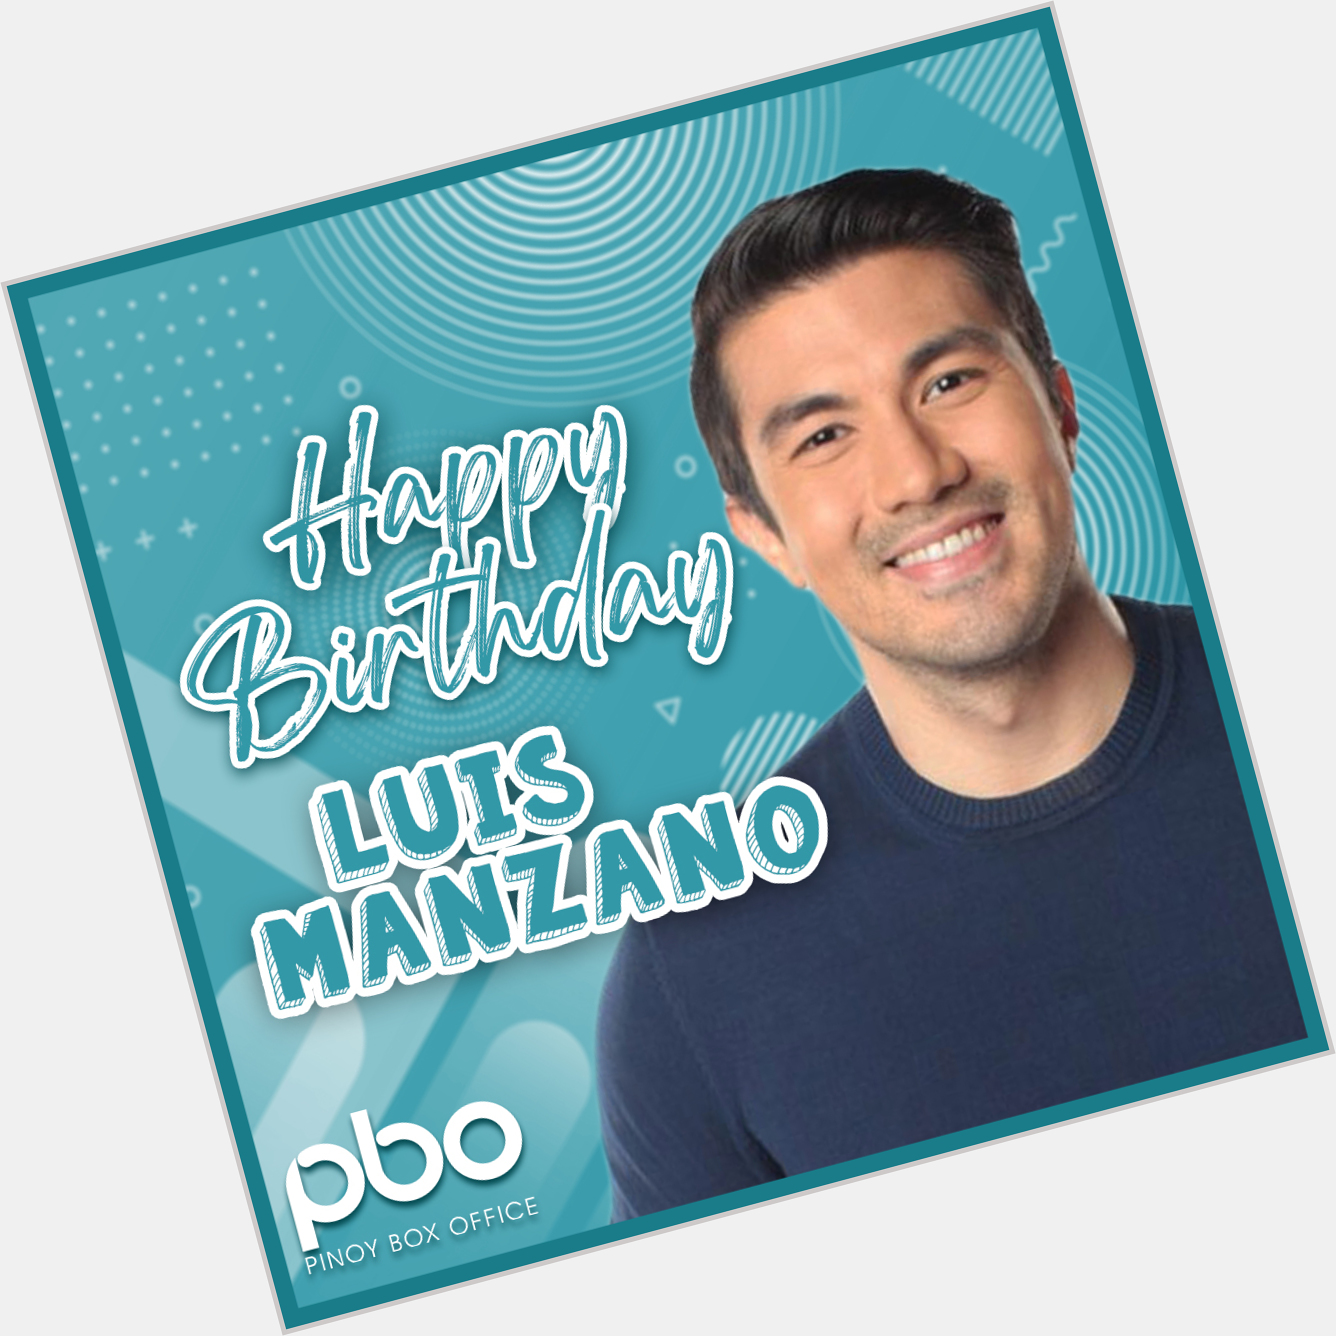 Happy birthday, Luis Manzano! May your special day be amazing, wonderful, and unforgettable as you are! 